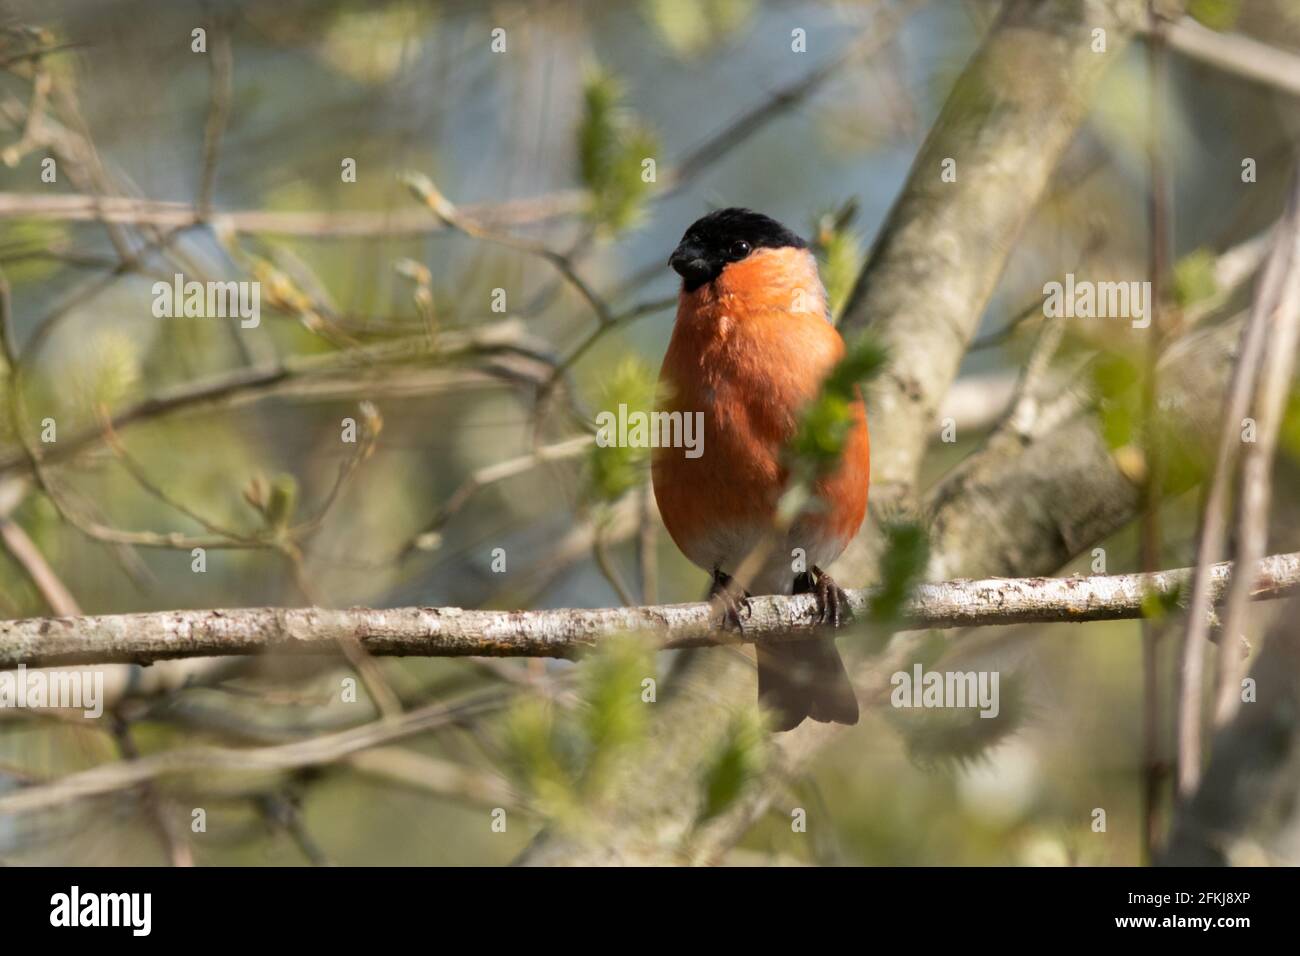 May 2nd, 2021. International Dawn Chorus Day is held on the first Sunday of May each year. People are encouraged to go out early in the morning to see and listen to the birds singing and to celebrate nature's great symphony. Pictured is a male bullfinch (Pyrrhula pyrrhula) at Fleet Pond Local Nature Reserve in Hampshire, England, UK. Stock Photo